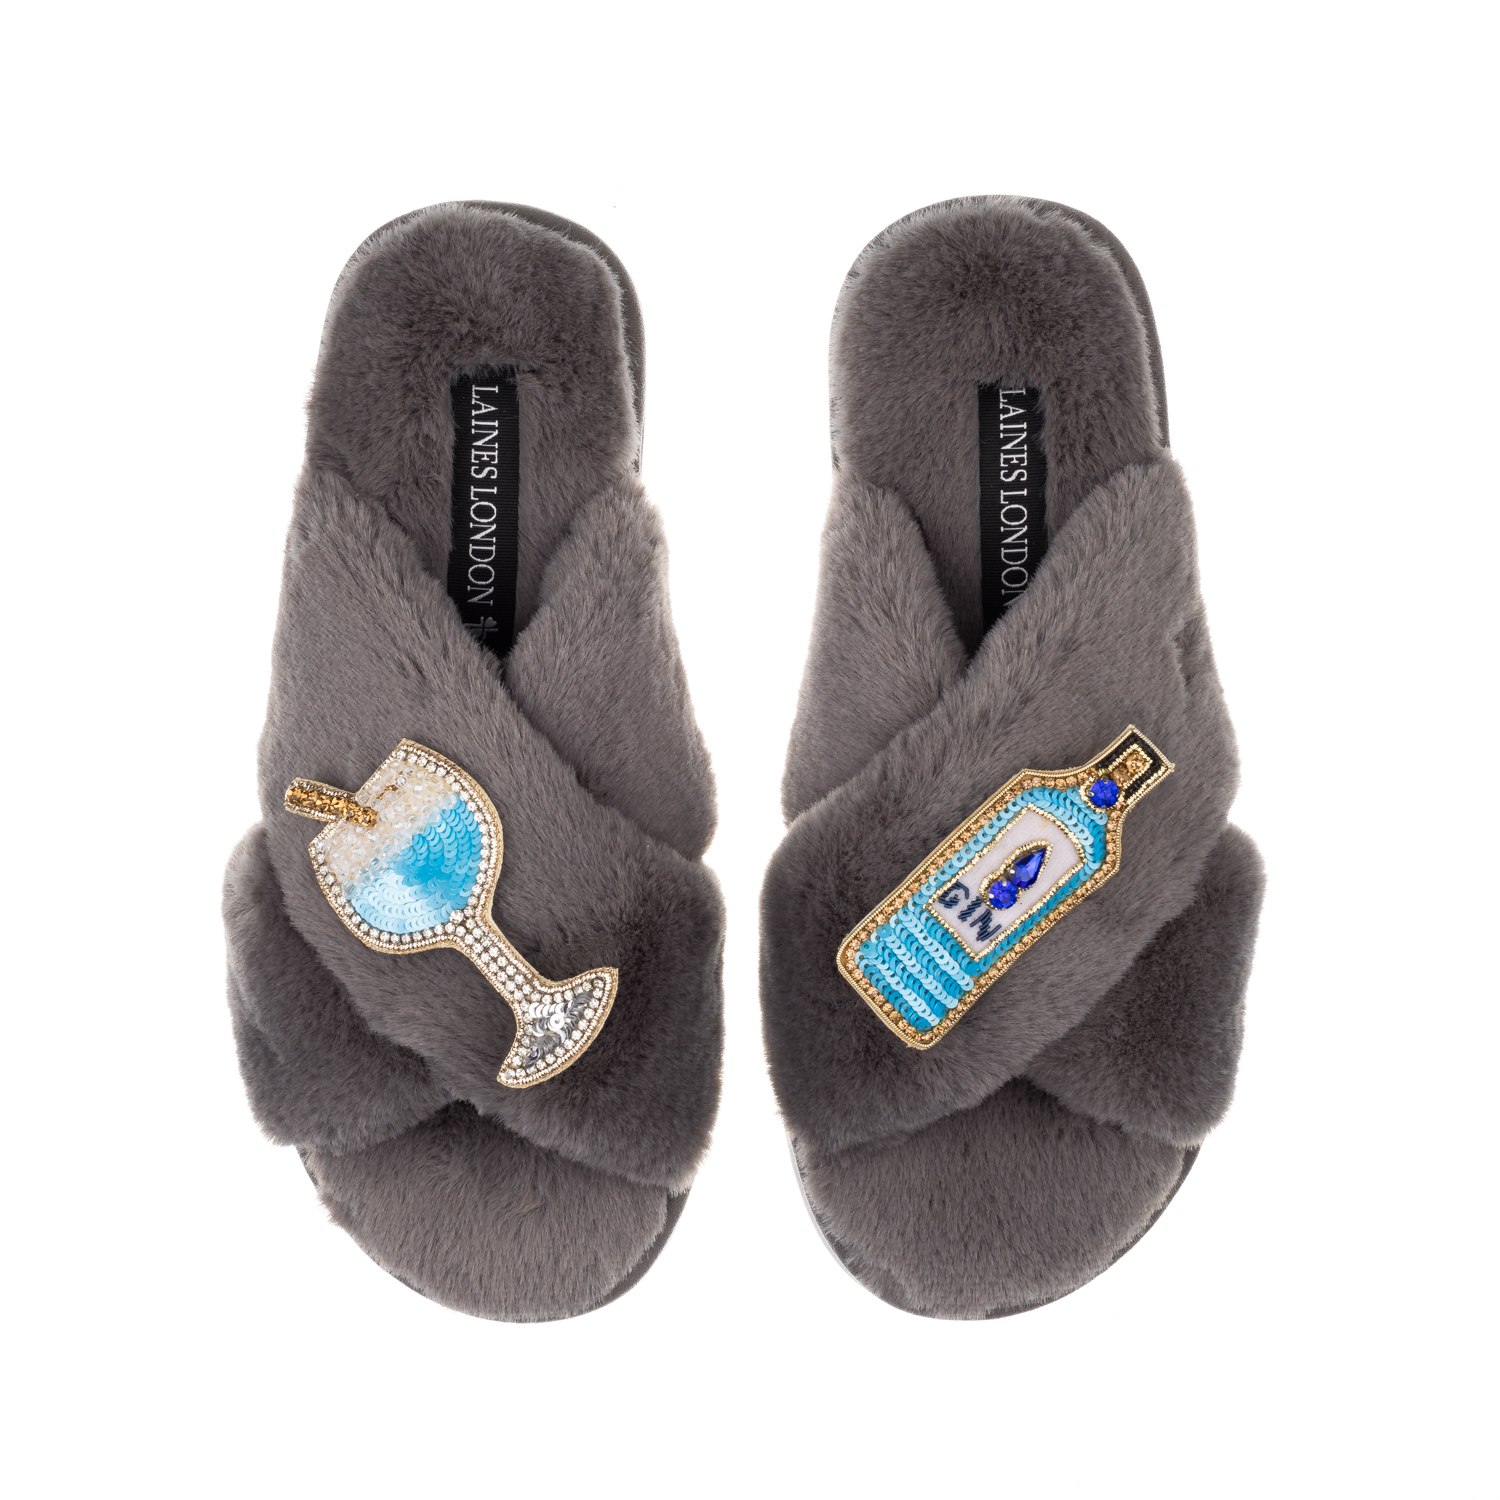 Women’s Classic Laines Slippers With Sapphire Gin Brooches - Grey Medium Laines London